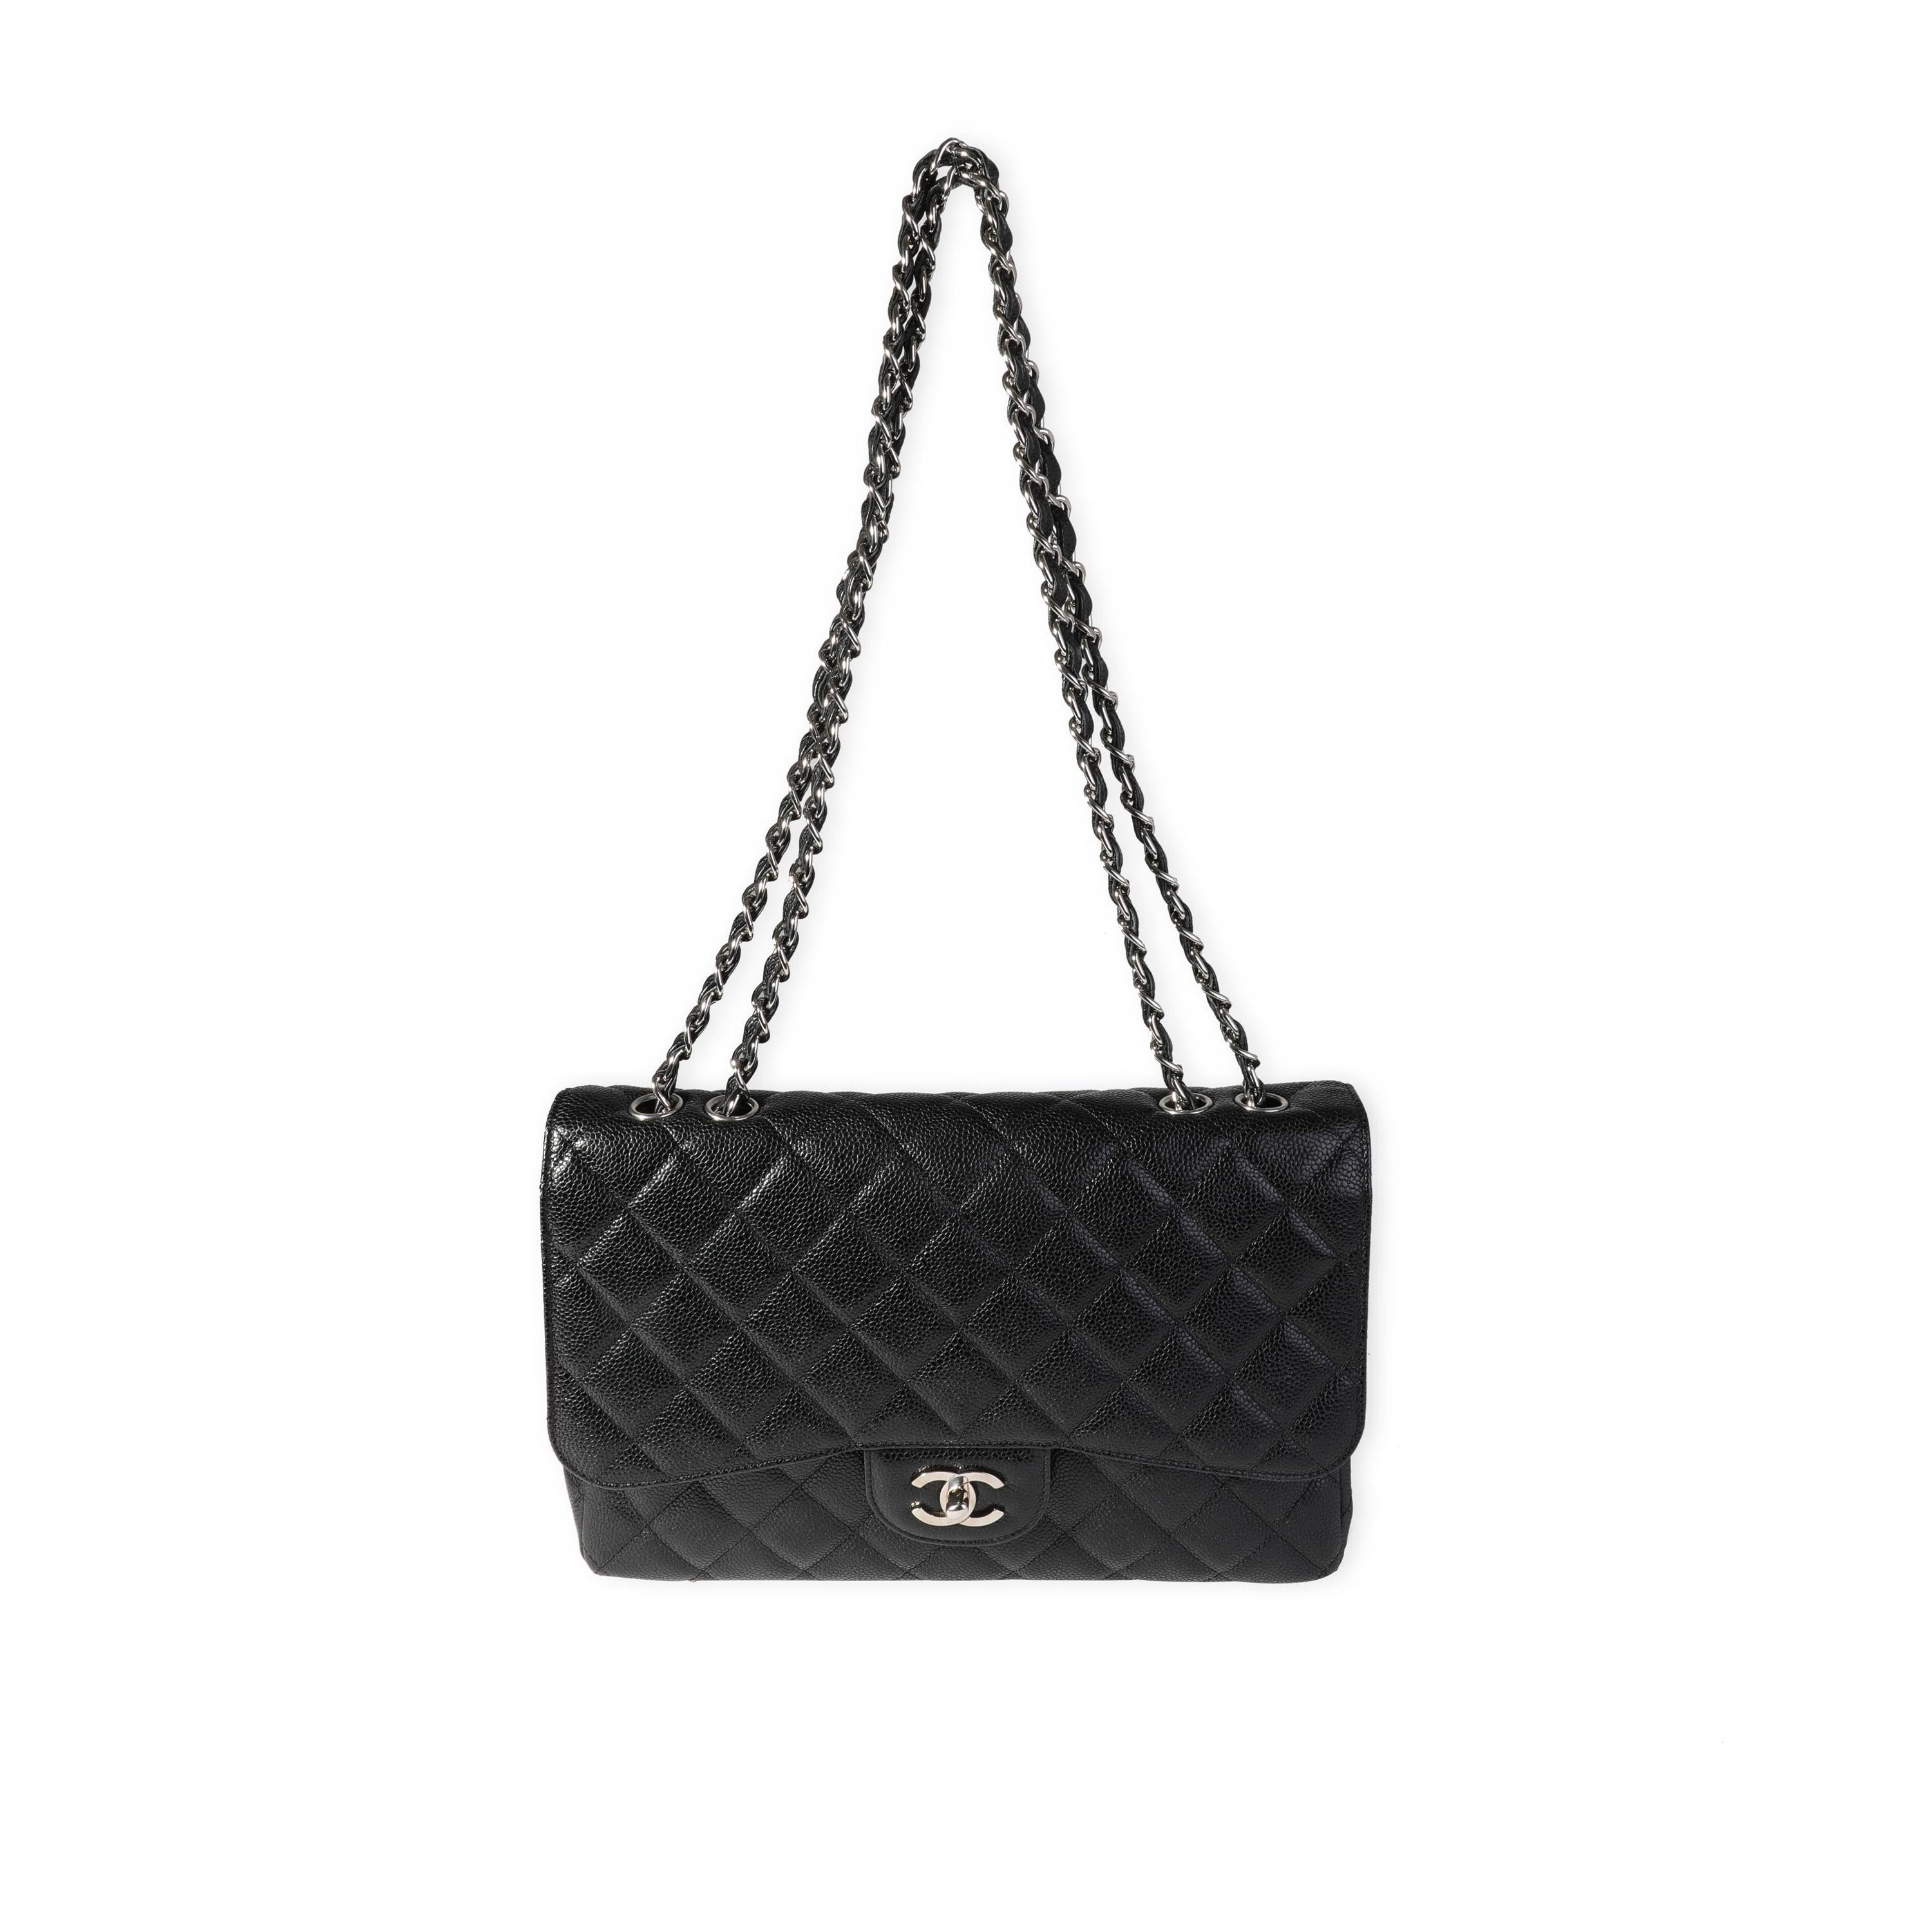 Listing Title: Chanel Black Caviar Quilted Jumbo Classic Single Flap Bag
SKU: 118406
MSRP: 9500.00

Handbag Condition: Good
Condition Comments: Minor scuffs at exterior corners. Light marks at interior pocket wall.
Brand: Chanel
Model: Black Caviar